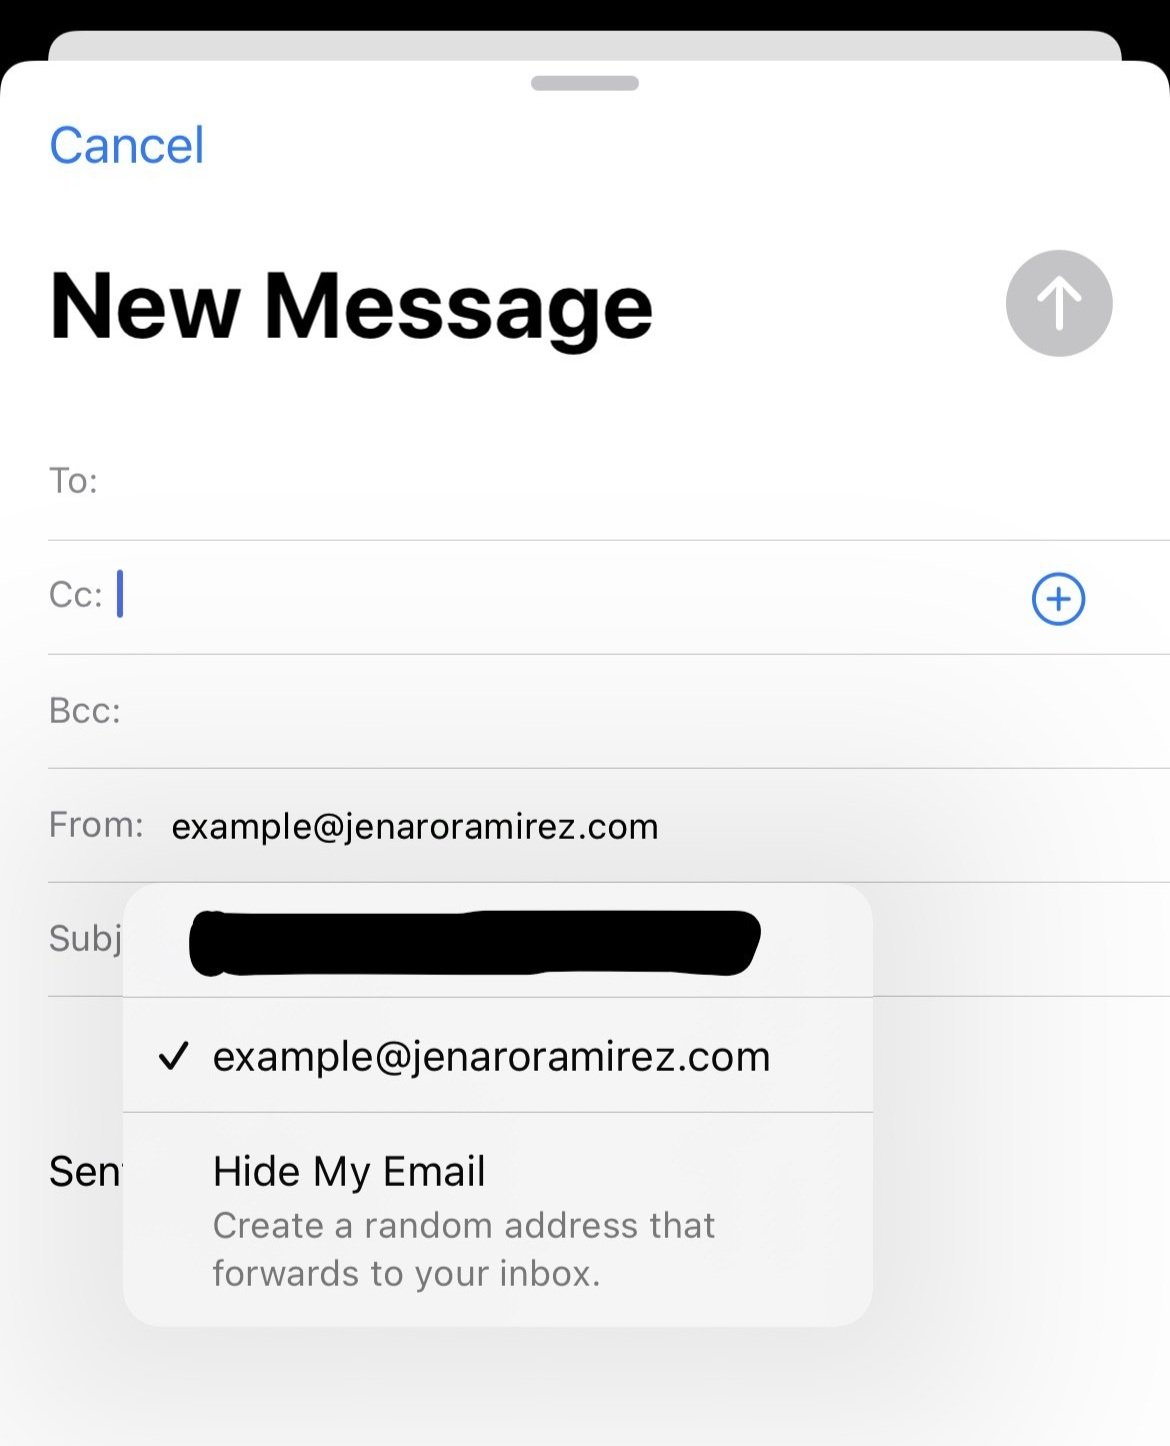 Personalize iCloud Mail: How to Buy a Custom Email Domain in iOS